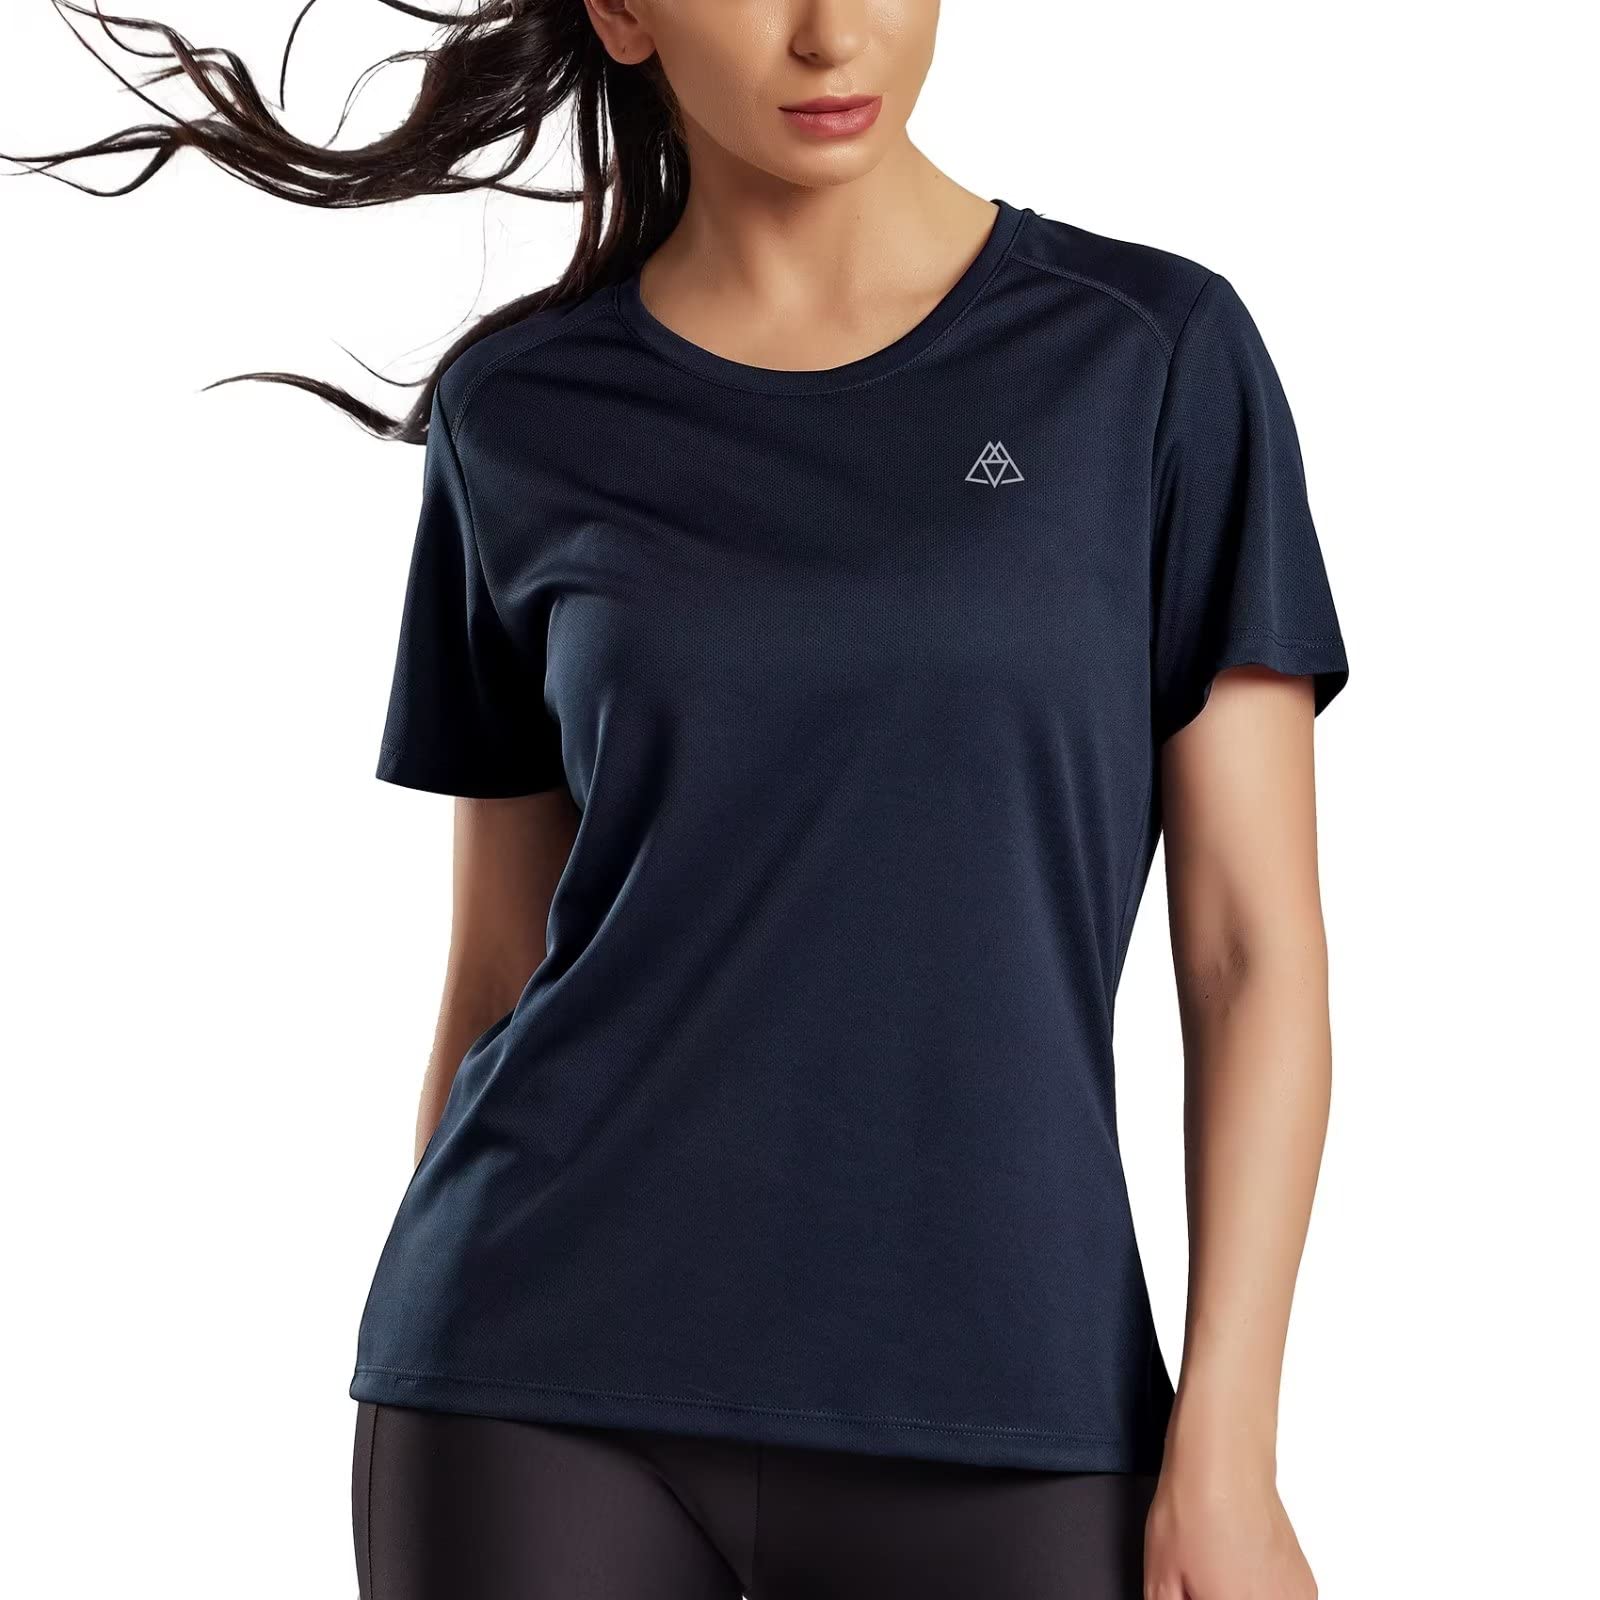 Women's Dry Fit Running Athletic T-Shirts Active Mesh Tee Shirt - Navy / XS